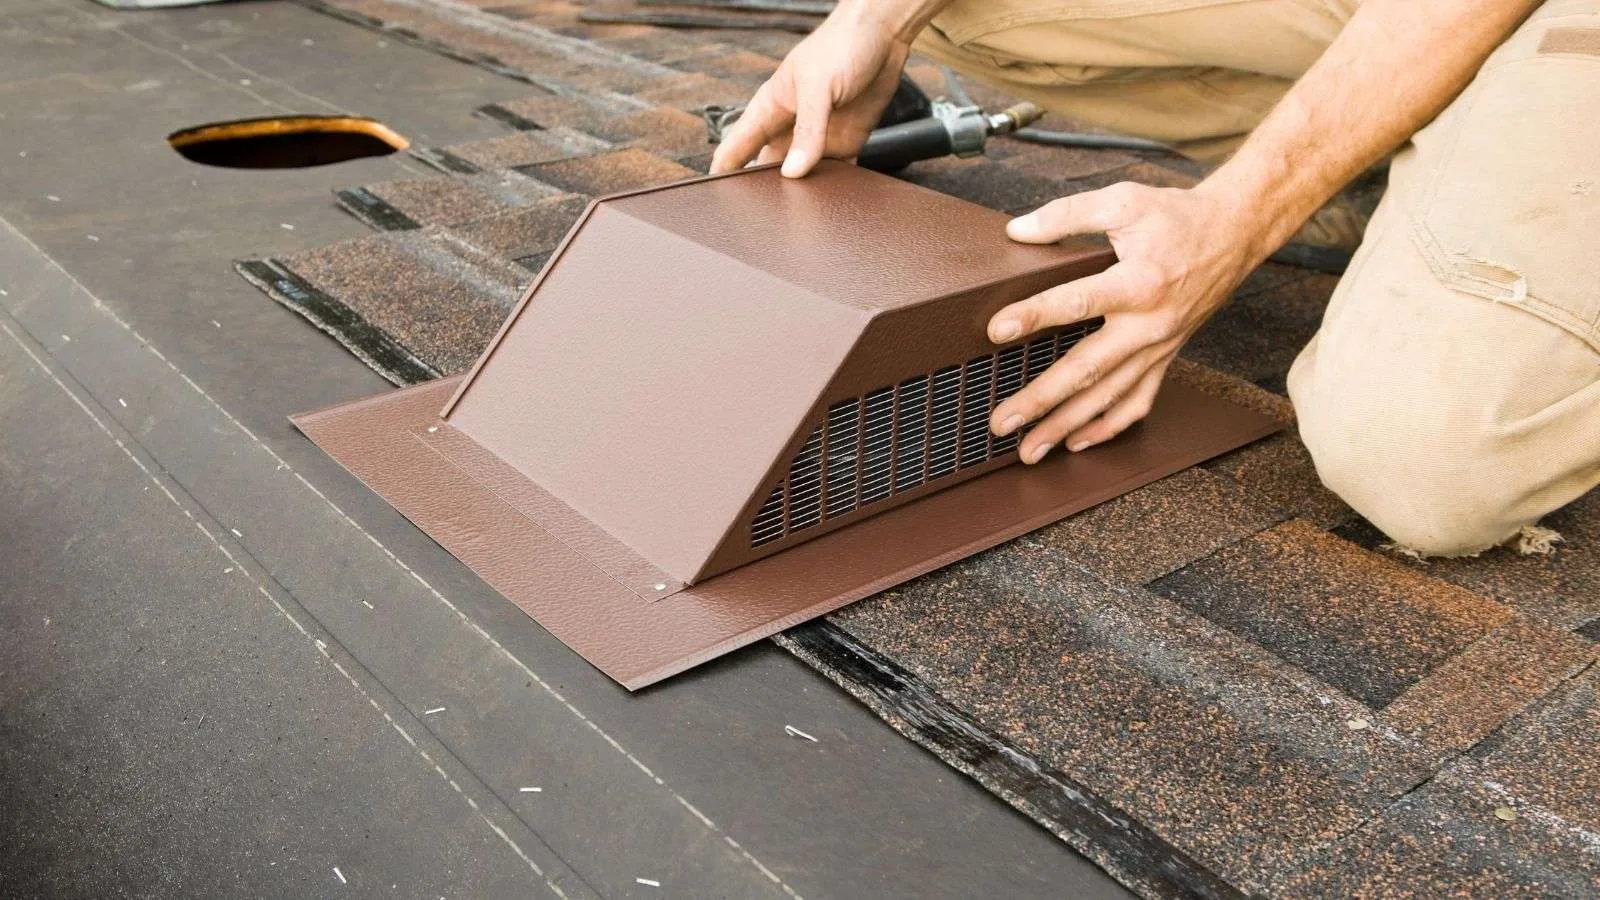 how to determine proper roof vent sizing for roofs - bighomeprojects.com